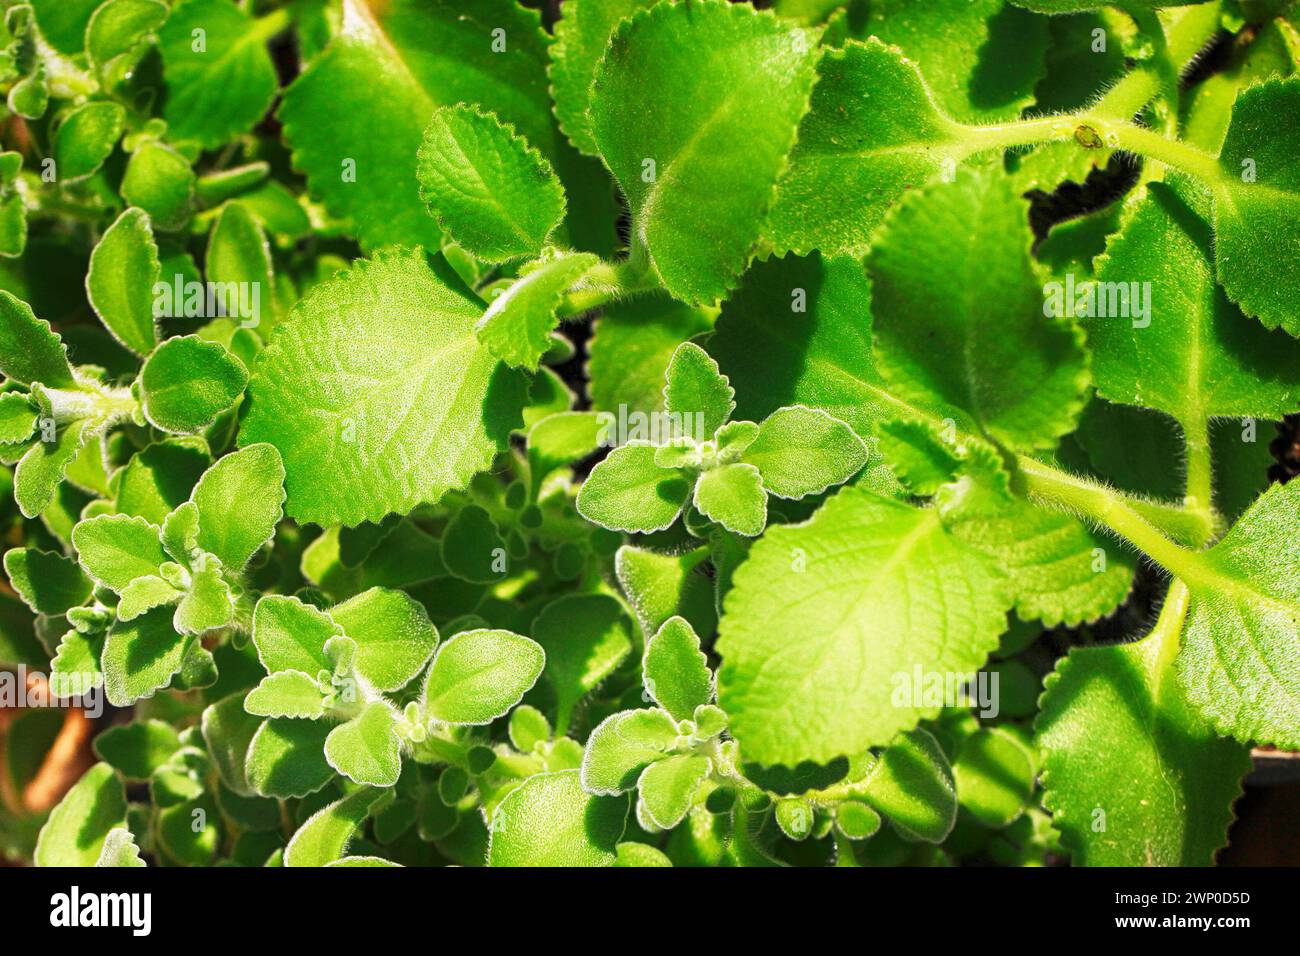 Plectranthus amboinicus plant texture as very nice natural background Stock Photo